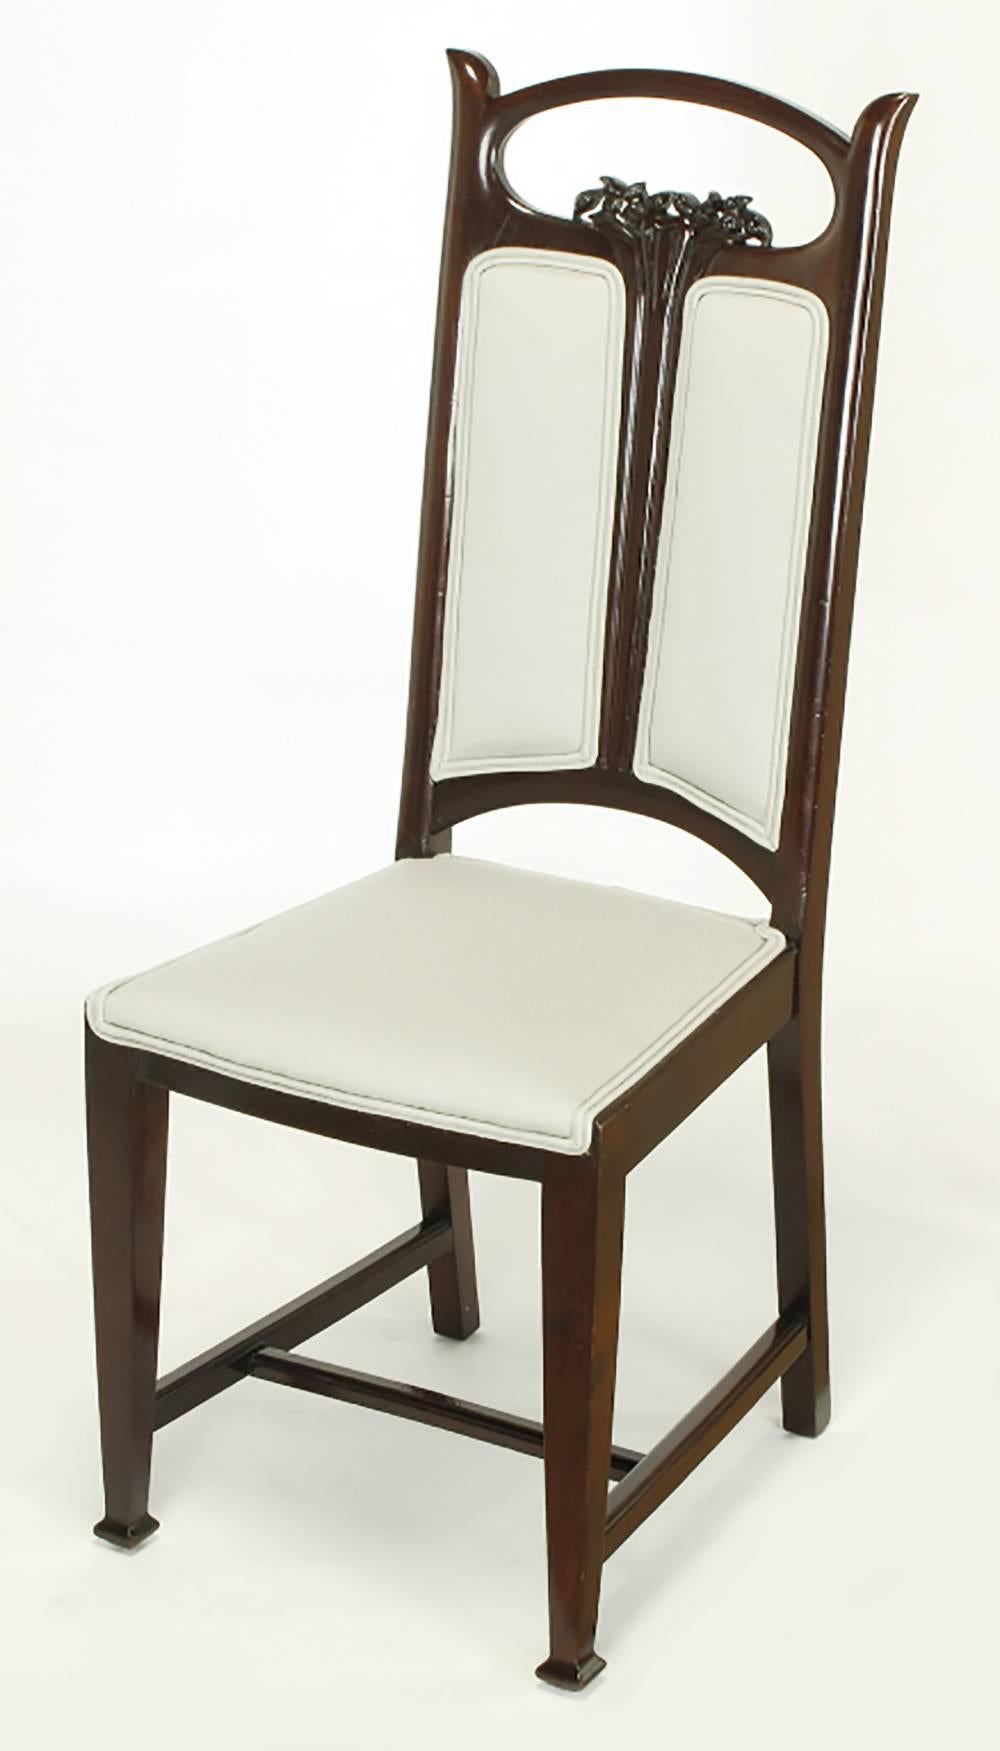 Pair of Art Nouveau Mahogany Side Chairs with Dove Grey Wool Upholstery In Good Condition For Sale In Chicago, IL